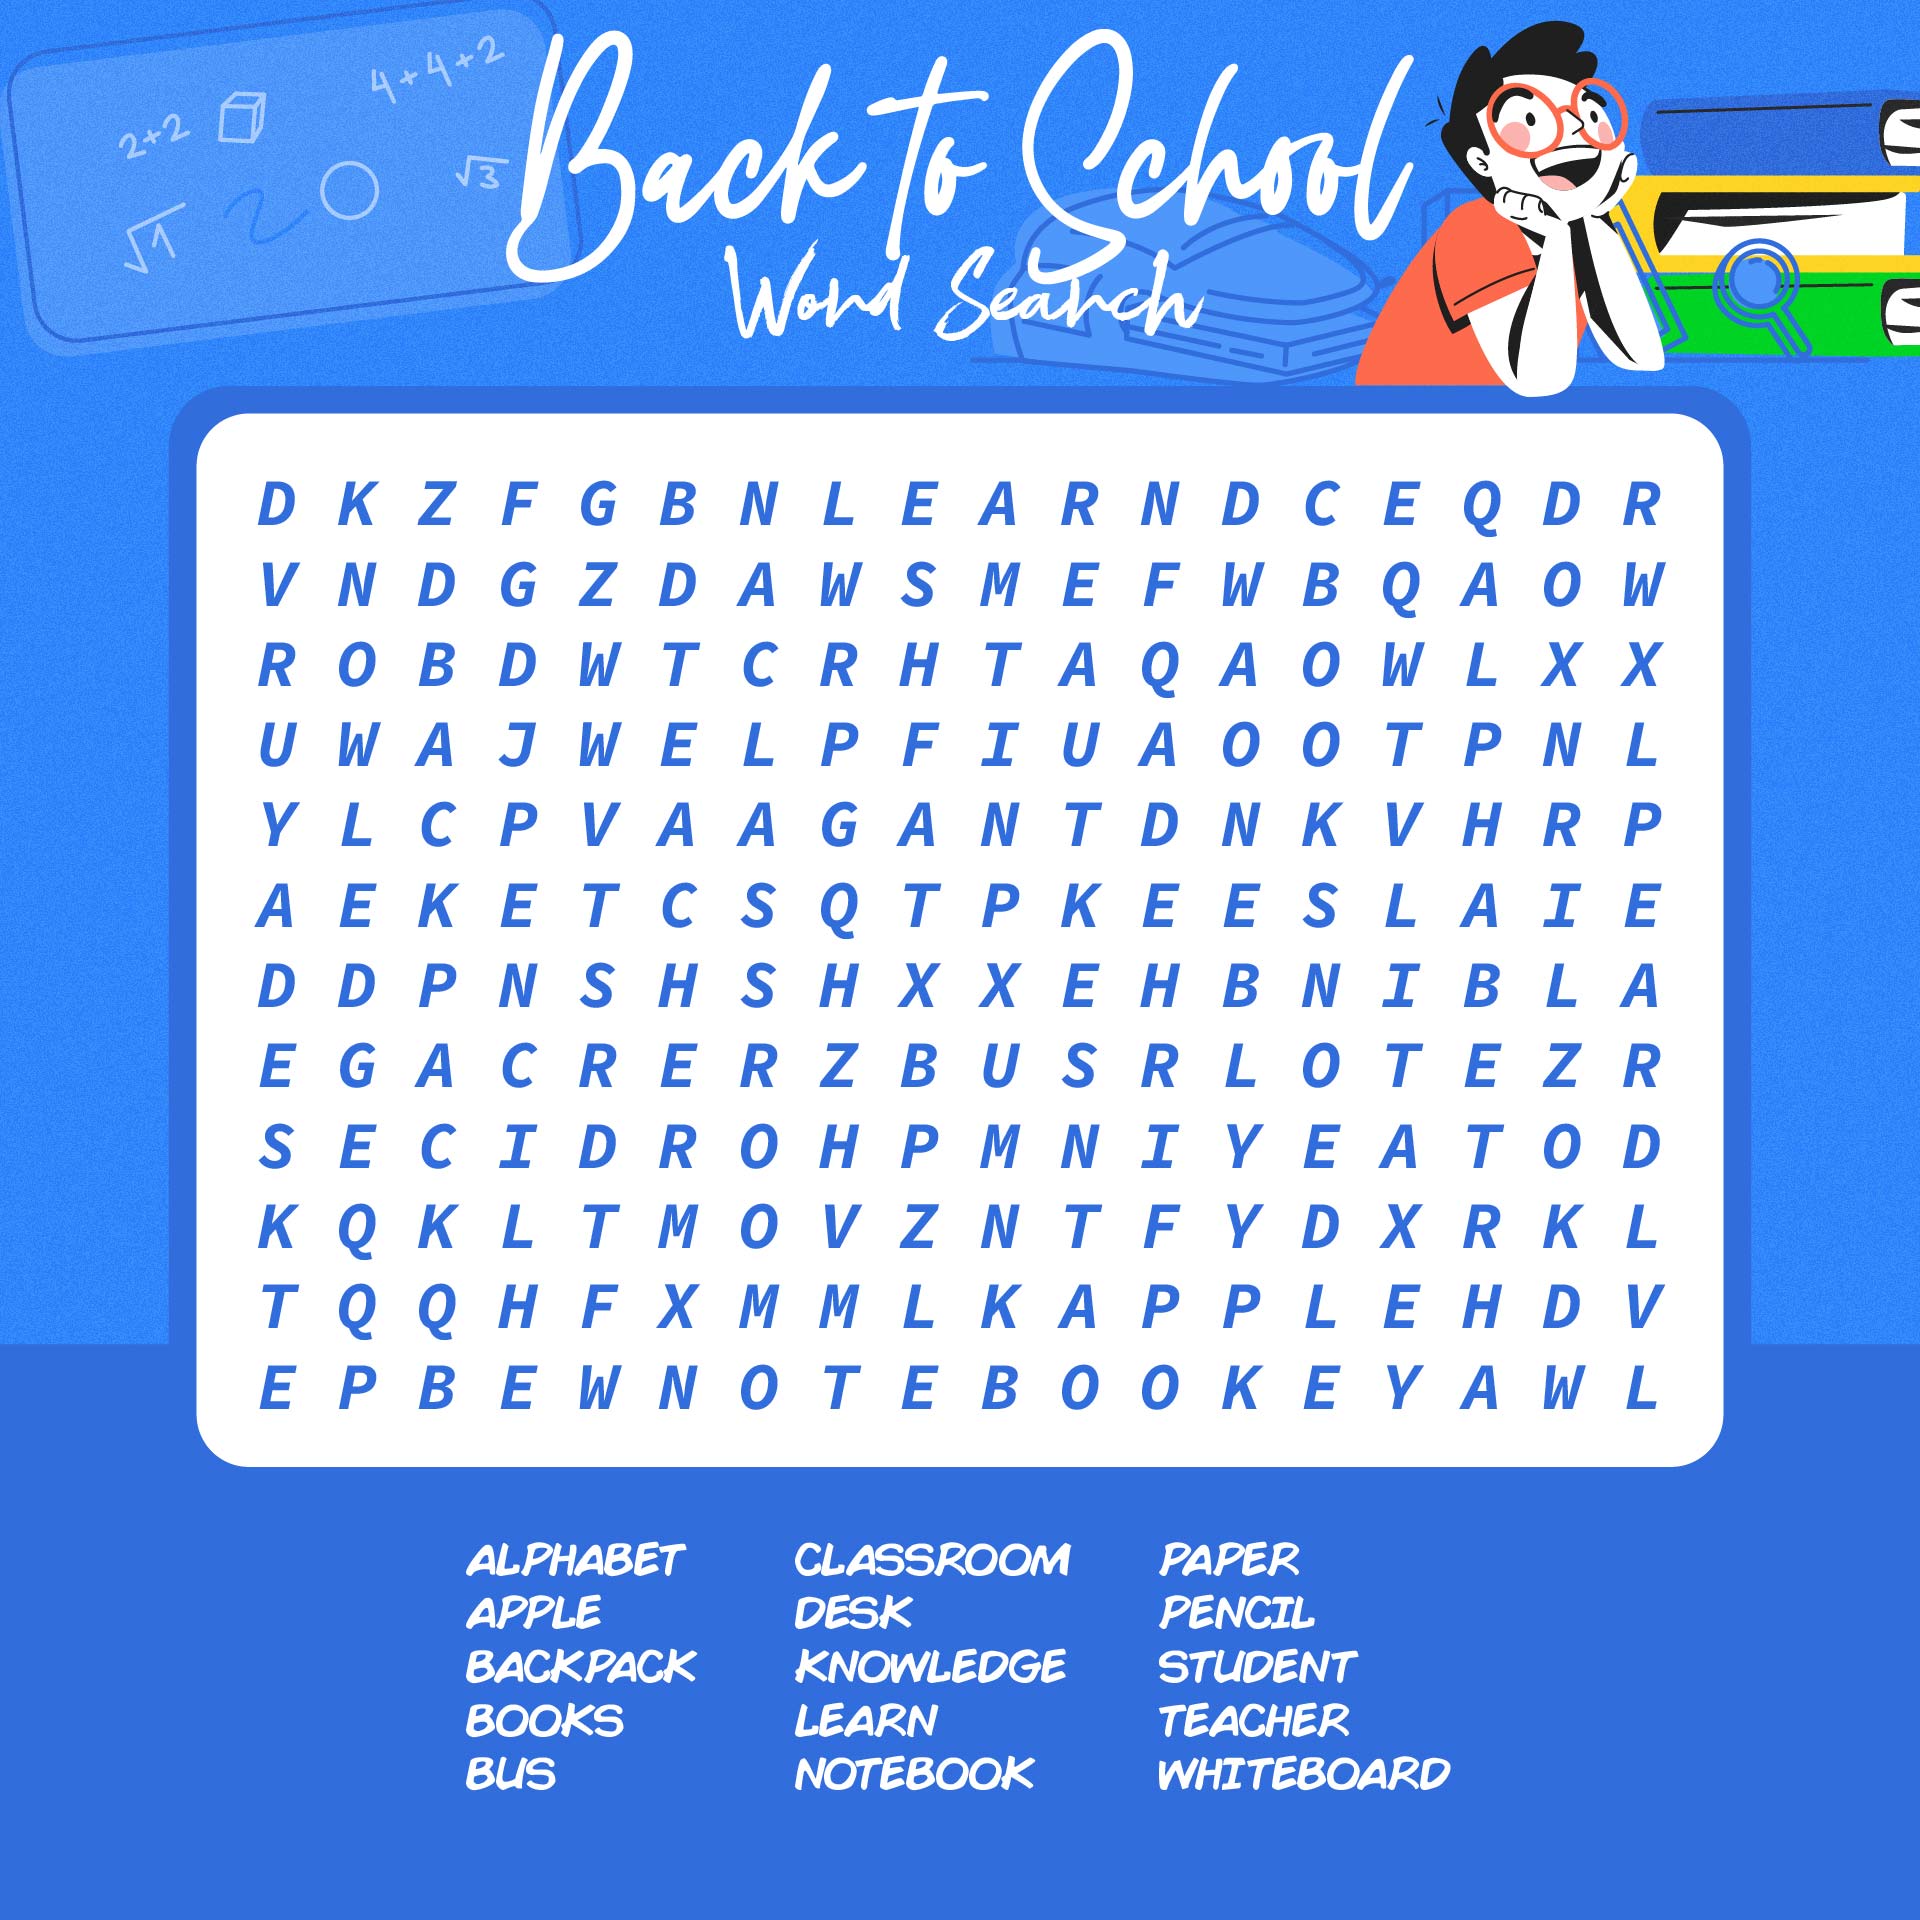 Printable Back To School Word Search Puzzles For Kids